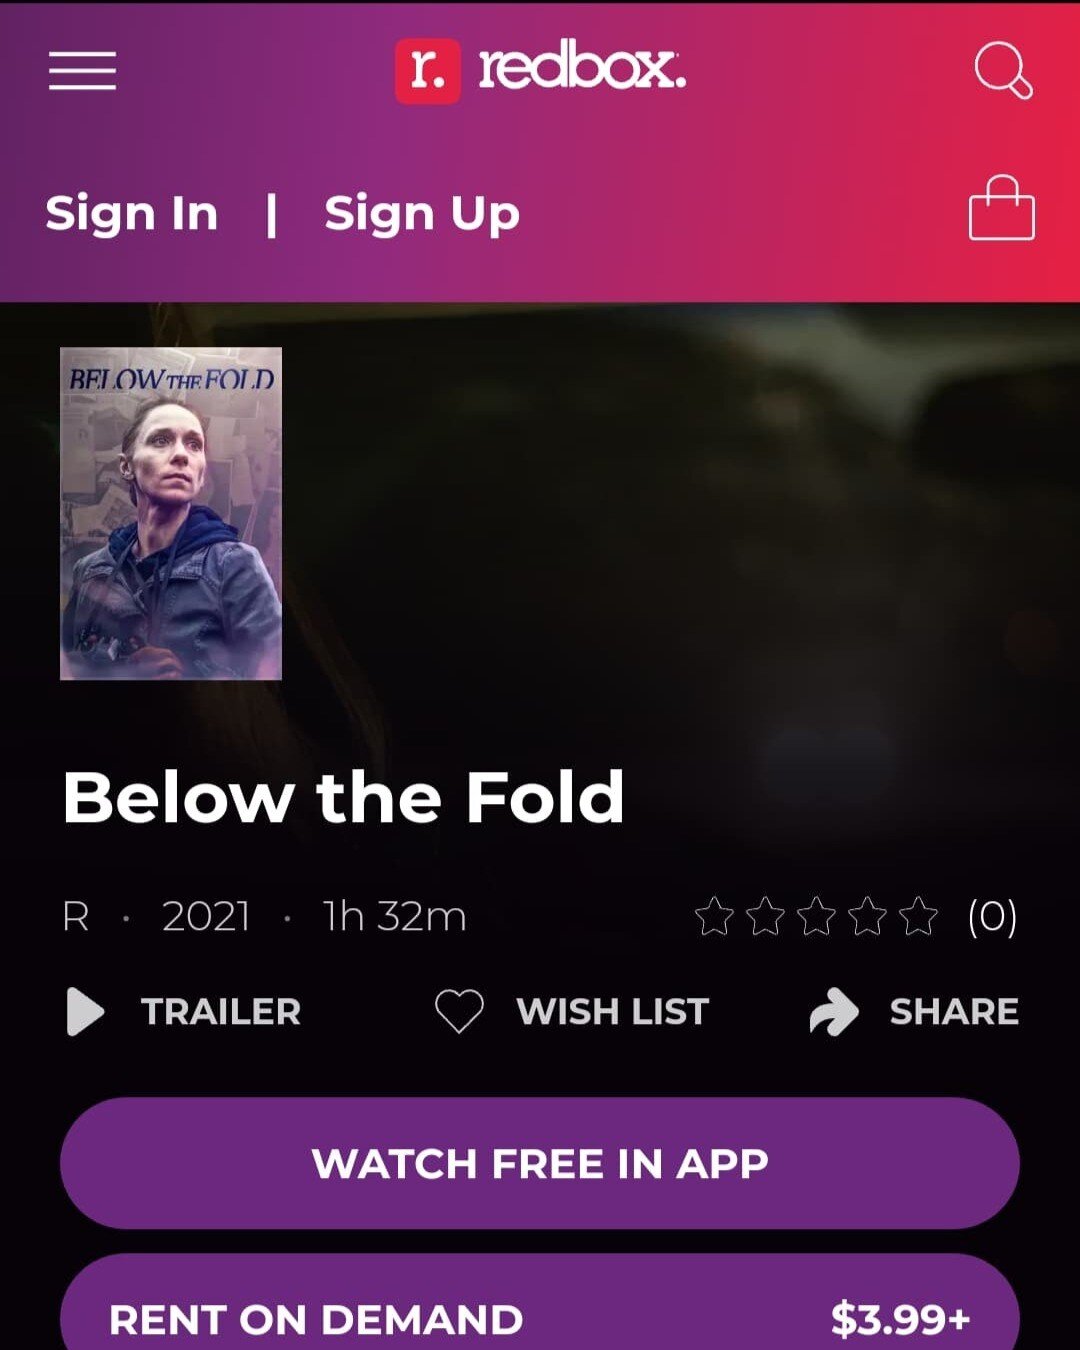 Another place to check out BELOW THE FOLD! Our film is available FREE (with ads) on @redbox digital. 

Always exciting to be able to share our film with more people! 

Link to the film in our bio.